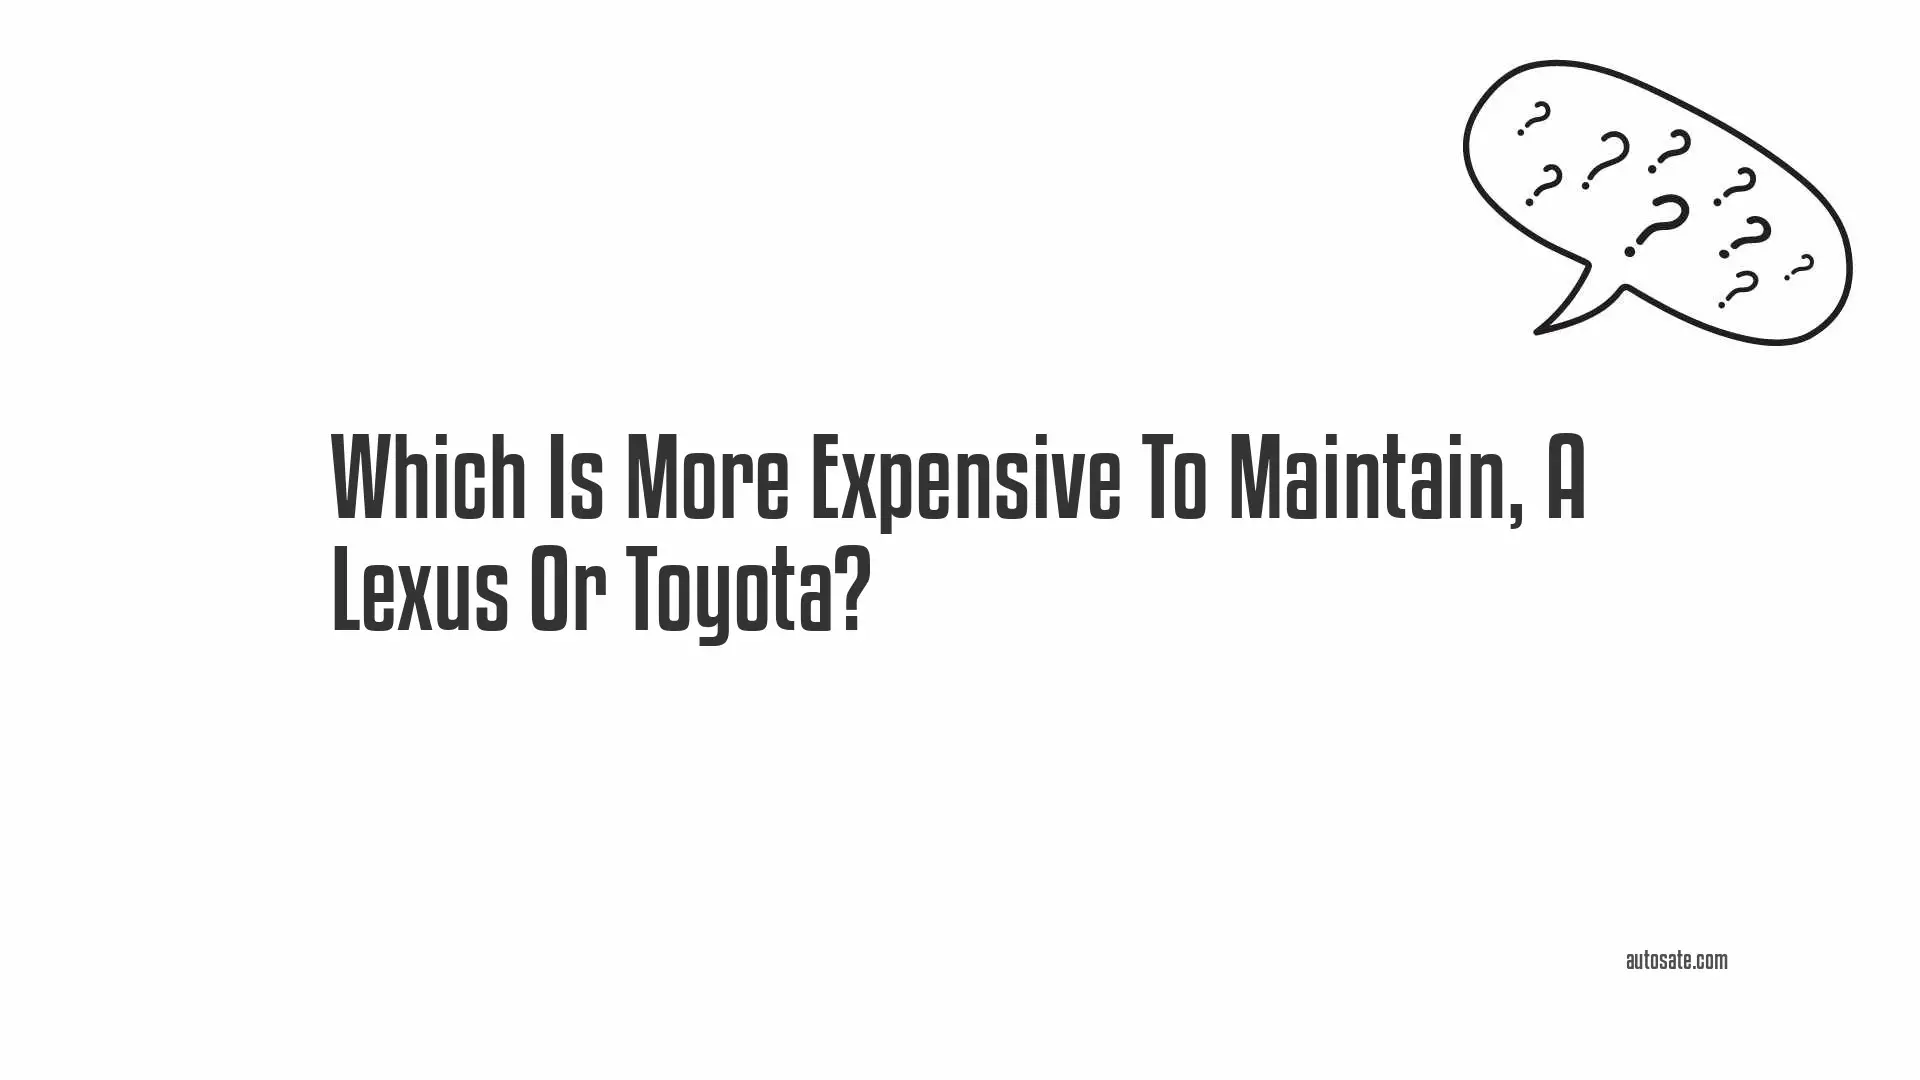 Which Is More Expensive To Maintain, A Lexus Or Toyota?